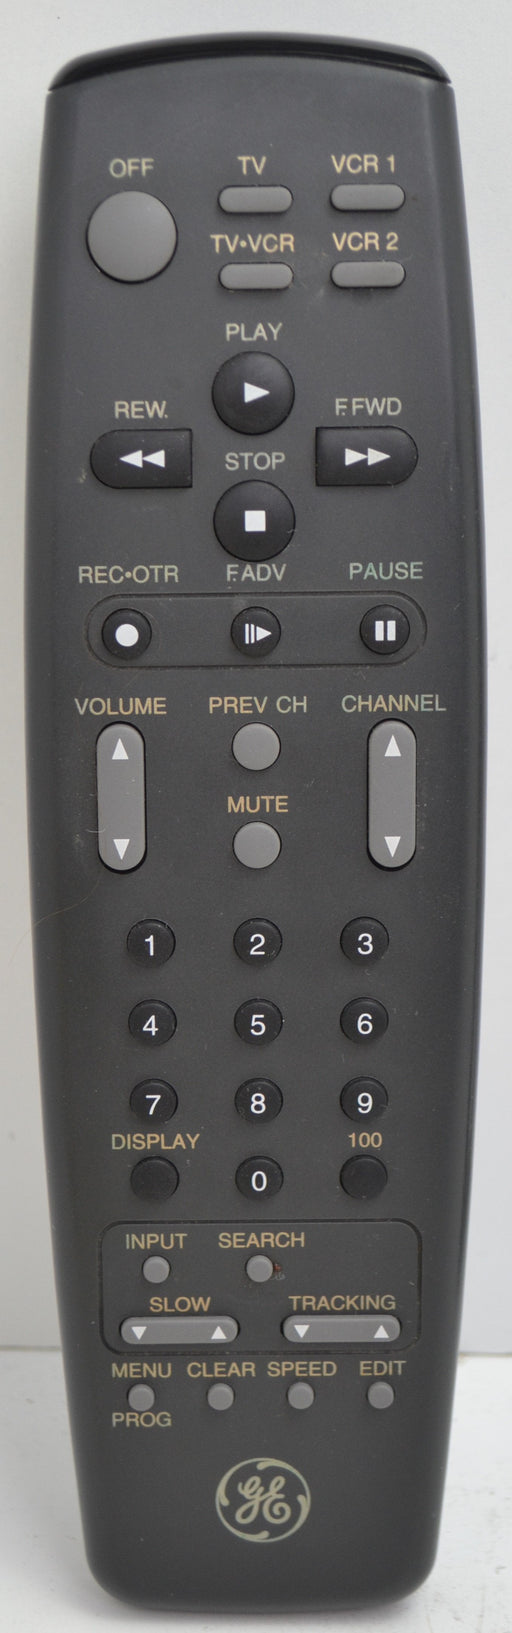 GE General Electric - VCR 1 and 2 / TV Control Center - Remote Control-Remote-SpenCertified-refurbished-vintage-electonics